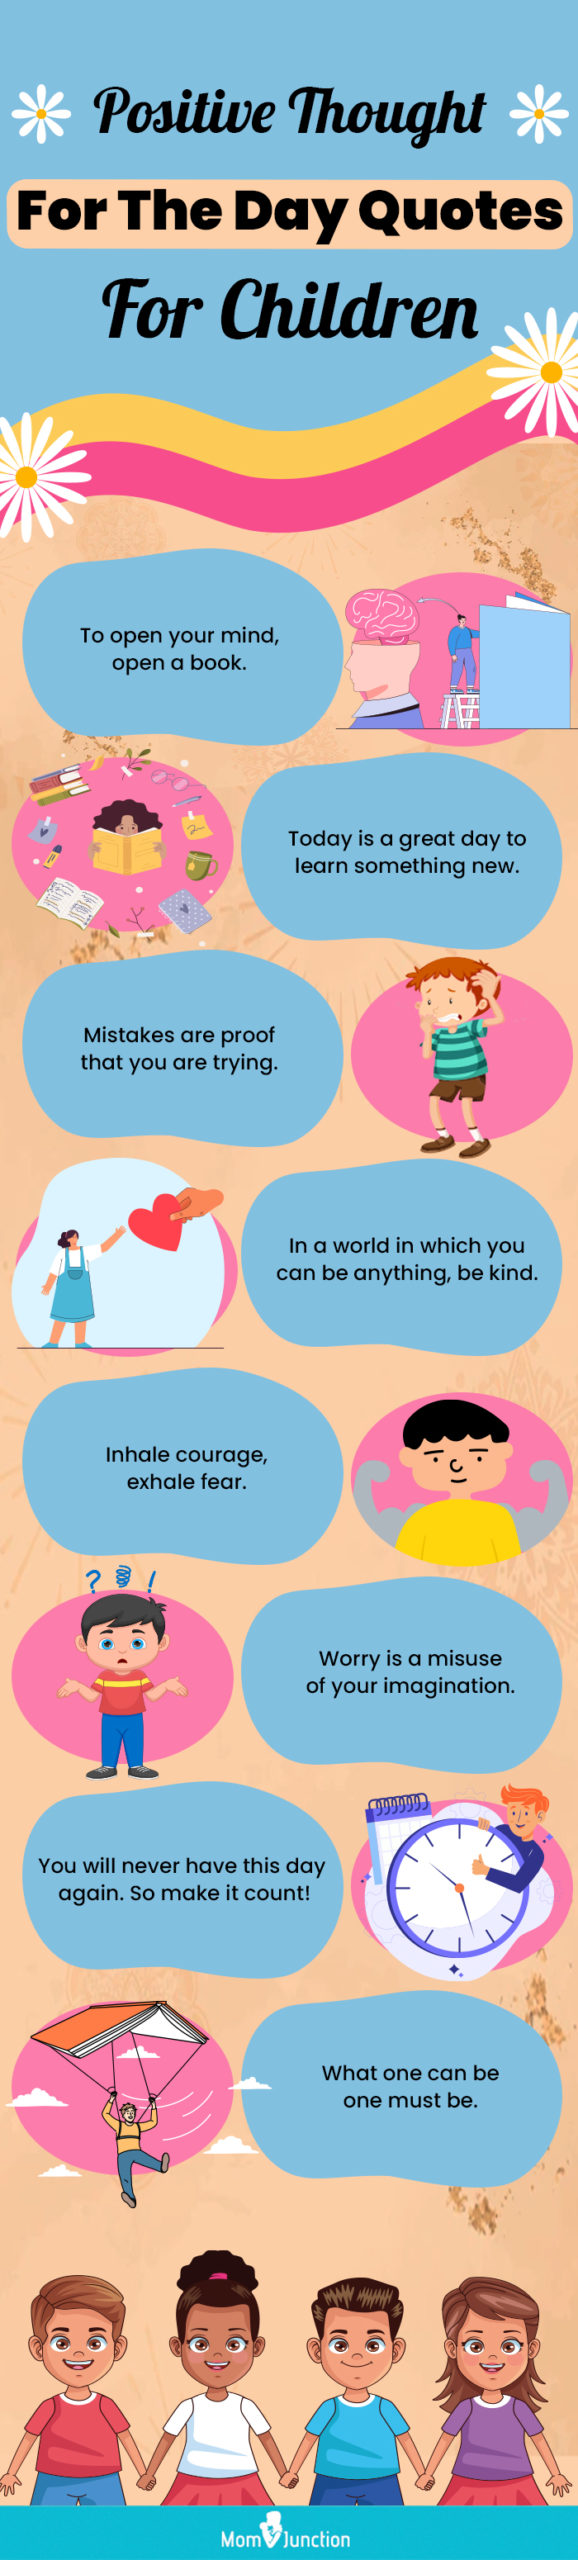 moral values quotes for children